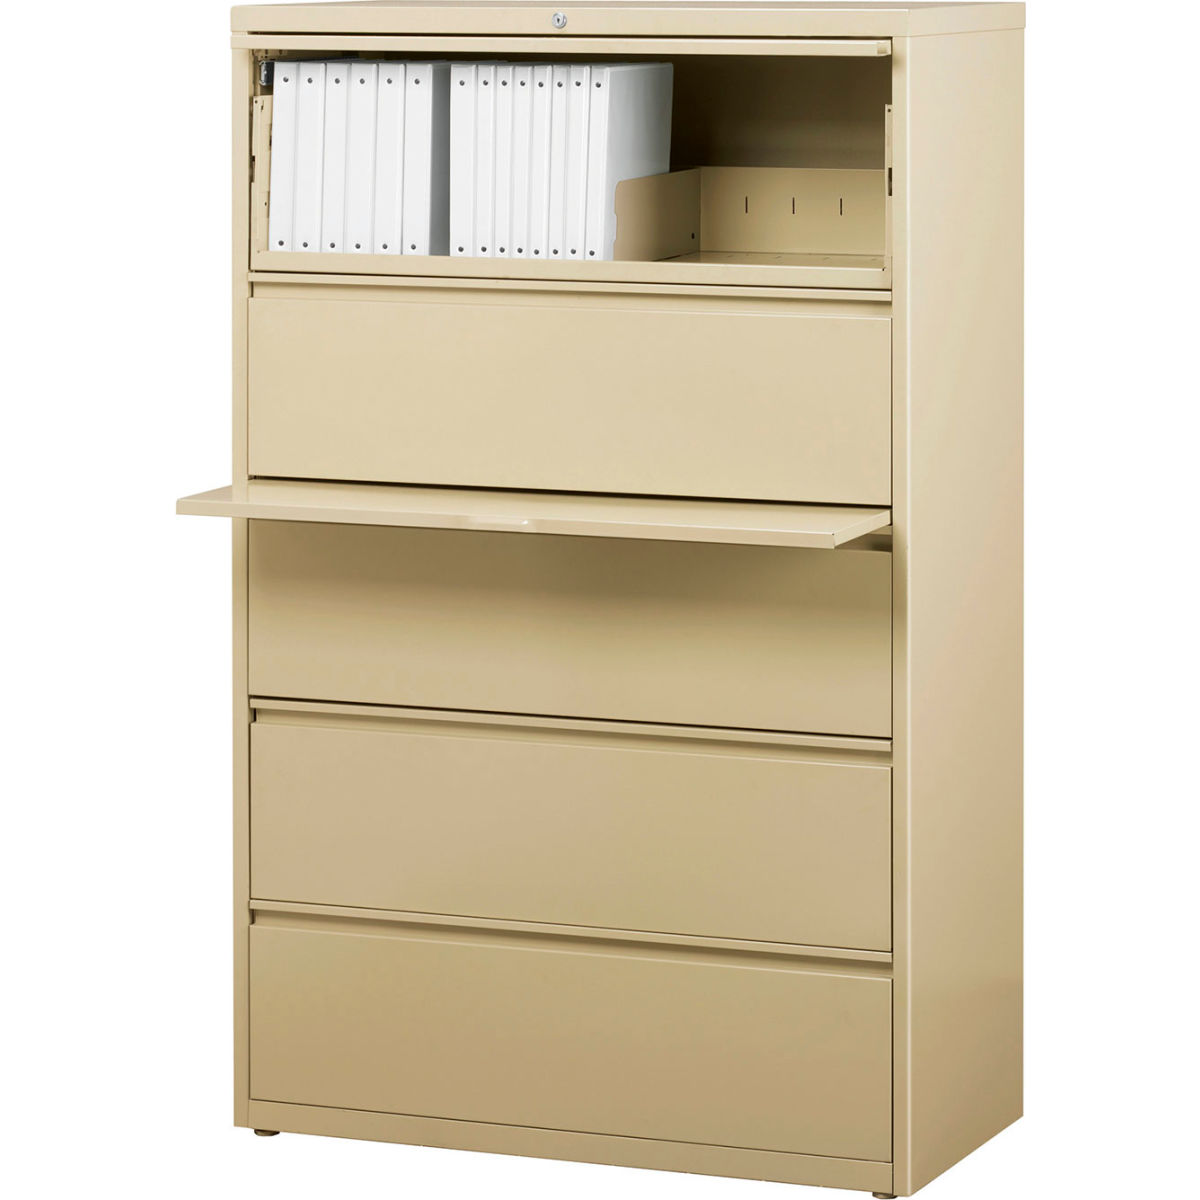 Hirsh Industries B691061 36 in. HL10000 Series Lateral File with 5-Drawer - Putty